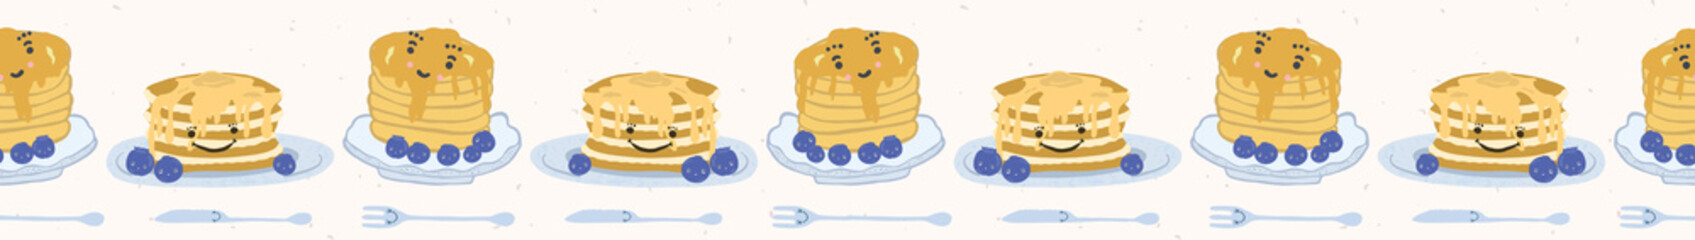 Cute blueberry pancake day breakfast vector illustration. Seamless repeating border. Hand drawn stack of delicious pancakes . Fresh blueberries, kawaii smiling face knife and fork. Food washi tape.